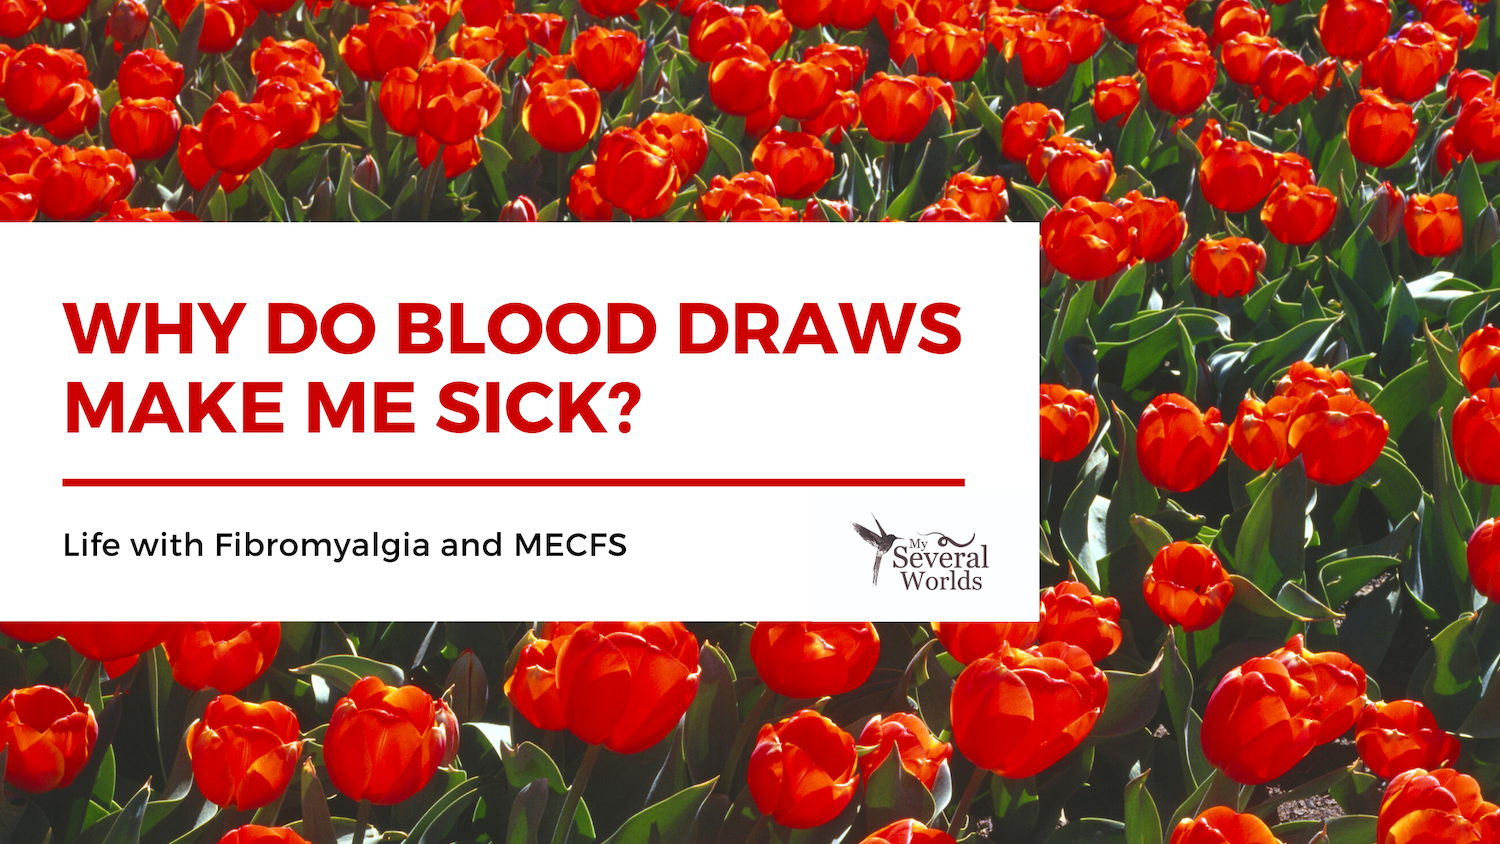 Life with Fibro and MECFS - Why do blood draws make me sick?